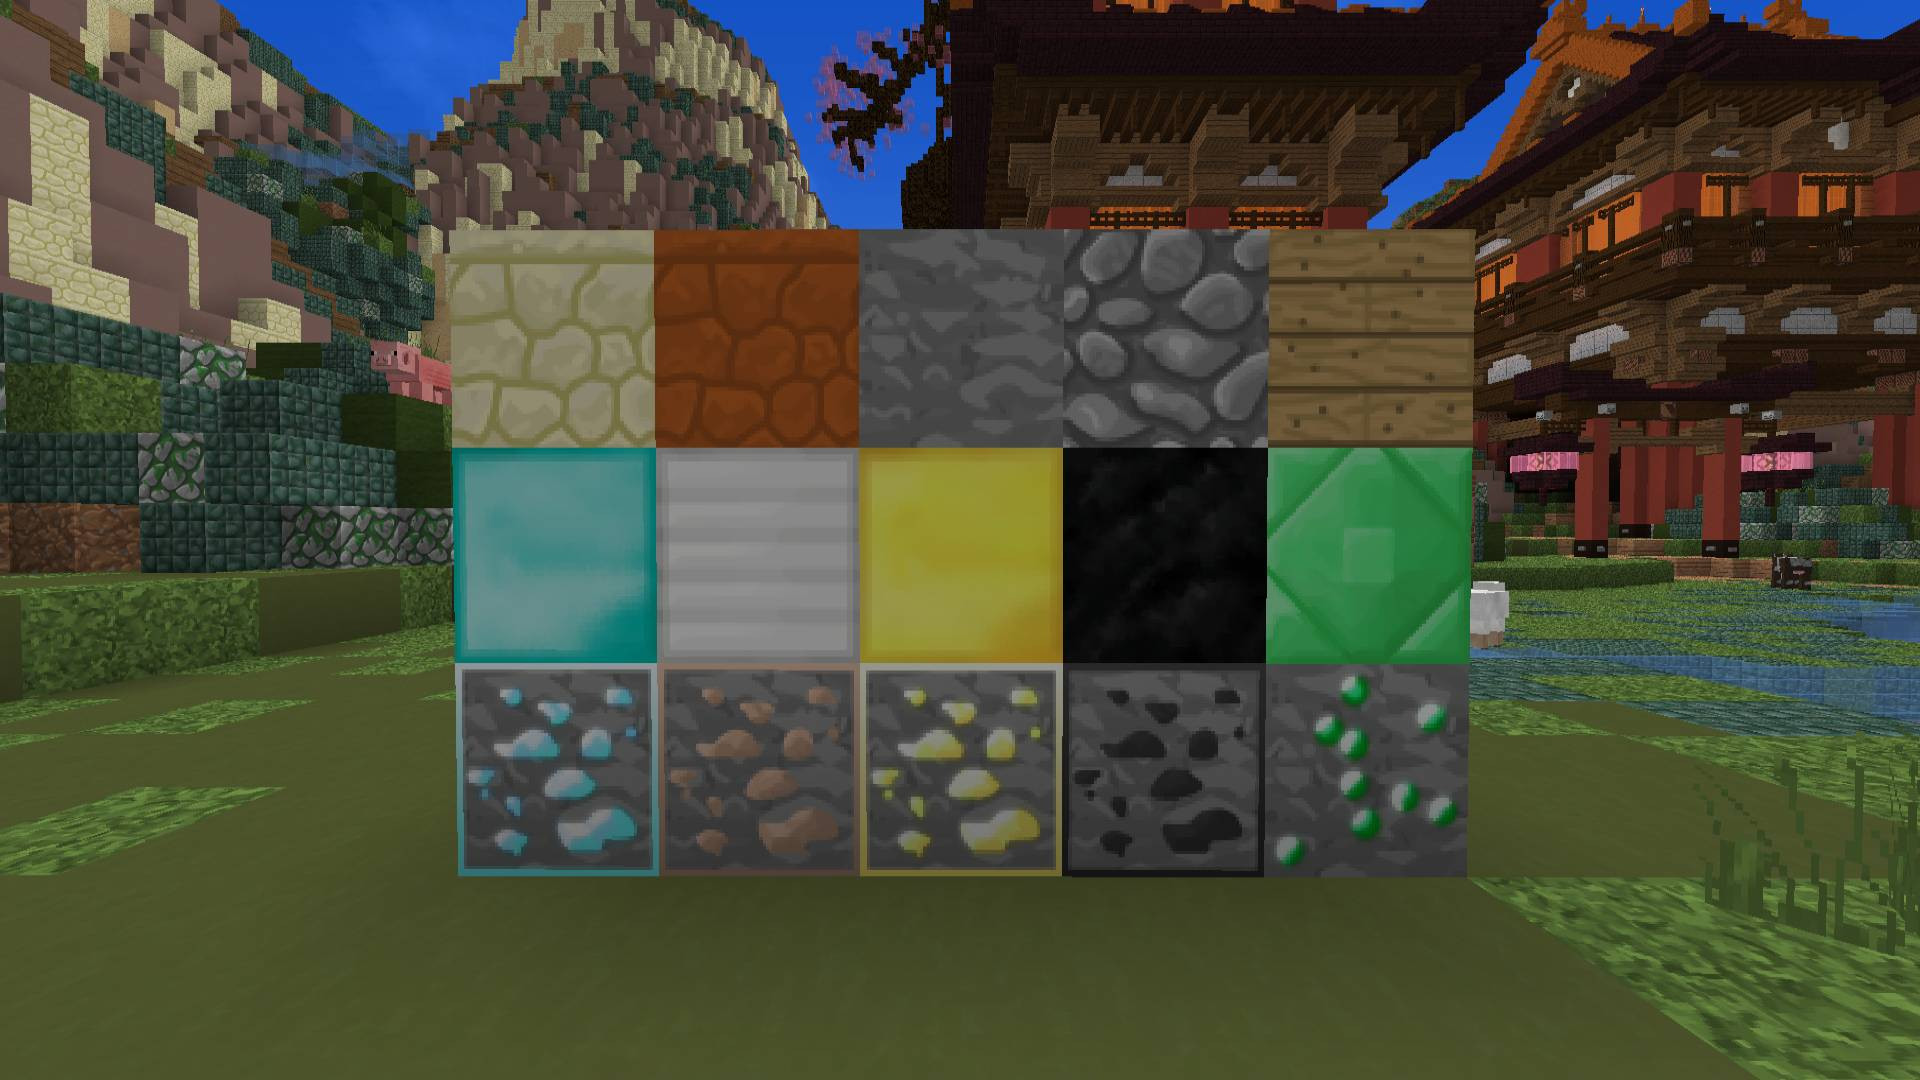 enola 256x minecraft resource pack pvp texture pack.